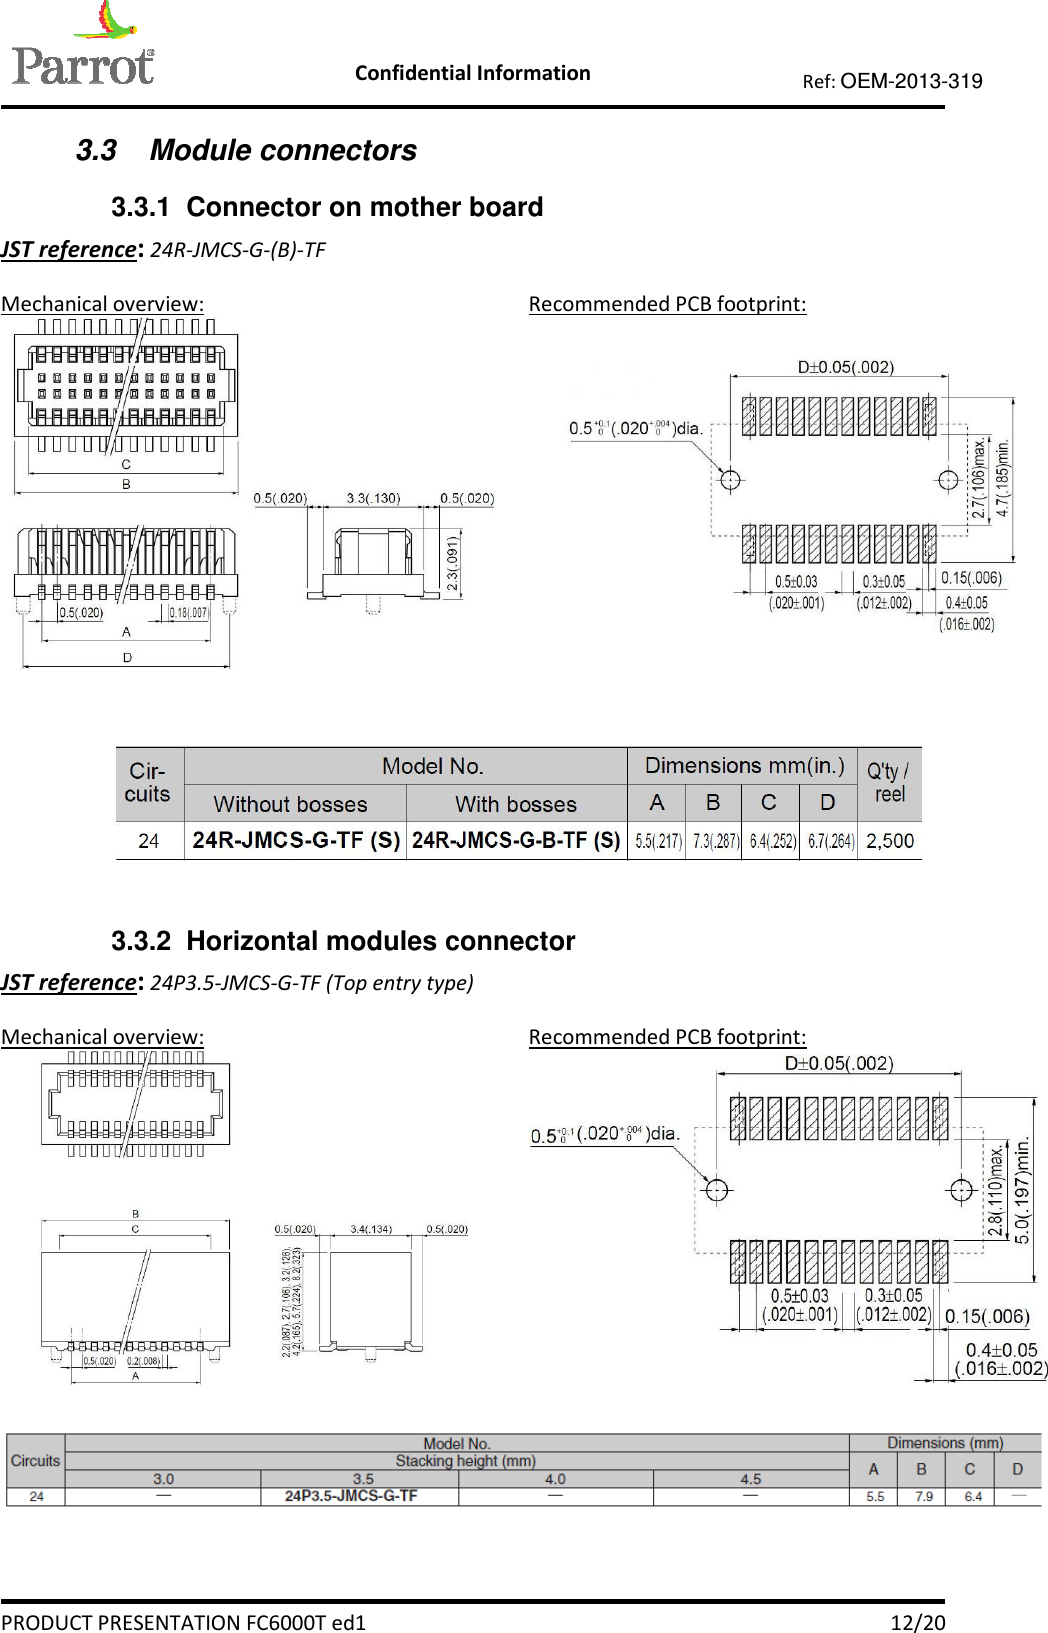    Confidential Information   PRODUCT PRESENTATION FC6000T ed1    12/20 Ref: OEM-2013-319  3.3  Module connectors 3.3.1  Connector on mother board JST reference: 24R-JMCS-G-(B)-TF Mechanical overview:  Recommended PCB footprint:       3.3.2  Horizontal modules connector JST reference: 24P3.5-JMCS-G-TF (Top entry type) Mechanical overview:  Recommended PCB footprint:       